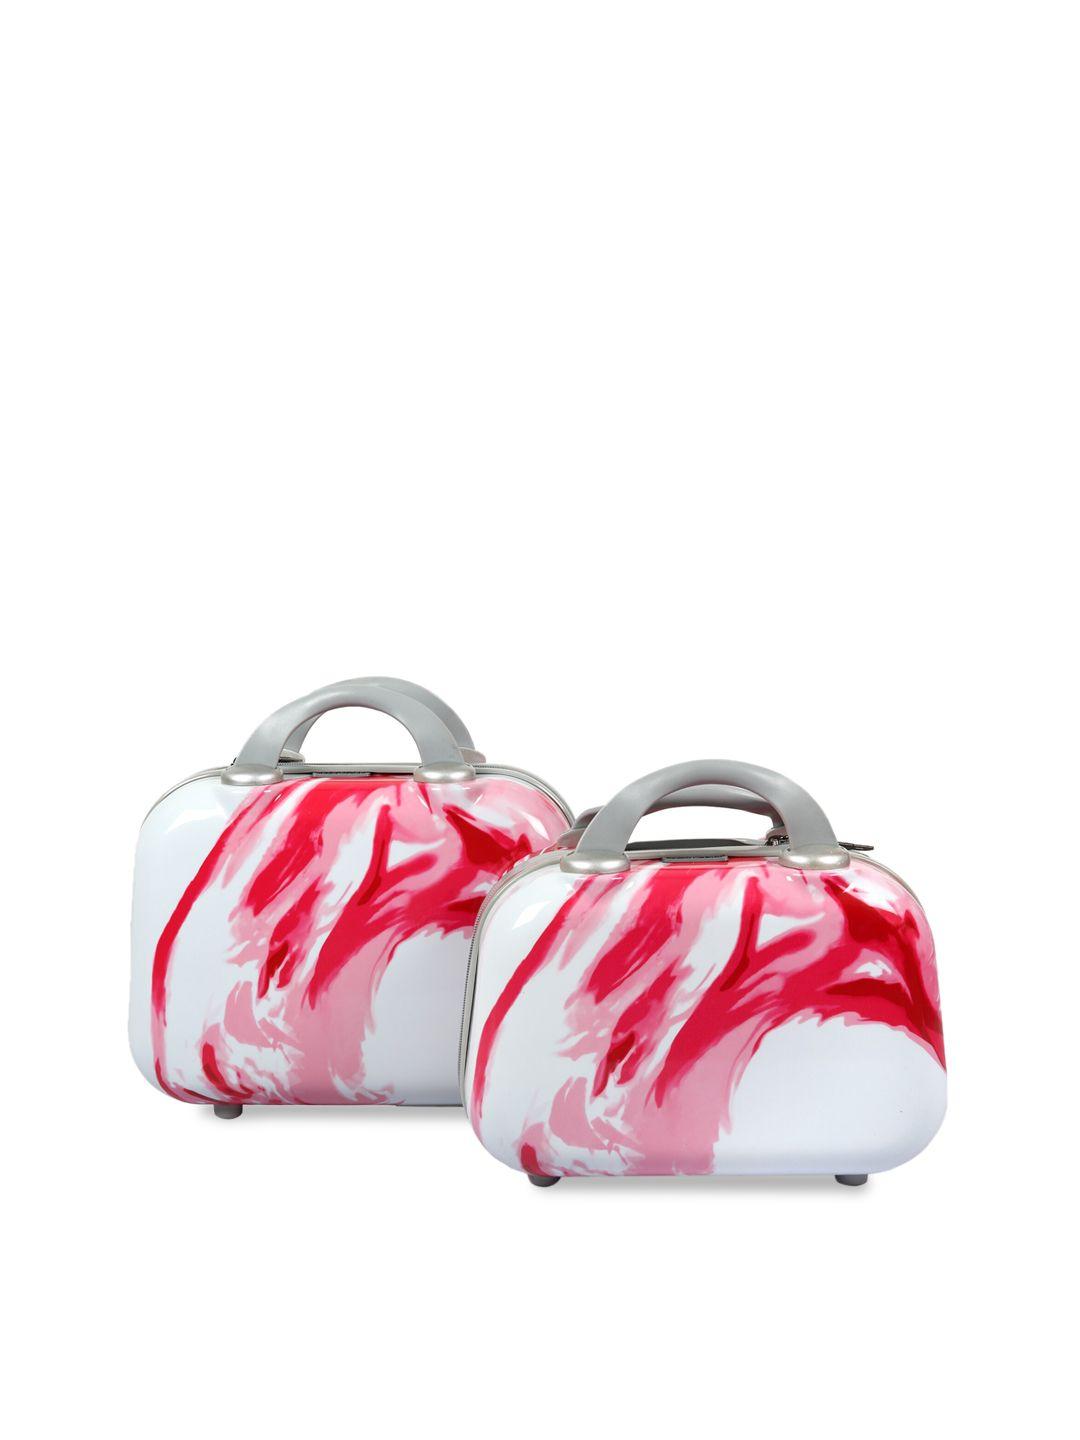 polo class red & white set of 2 travel luggage vanity bag 13l